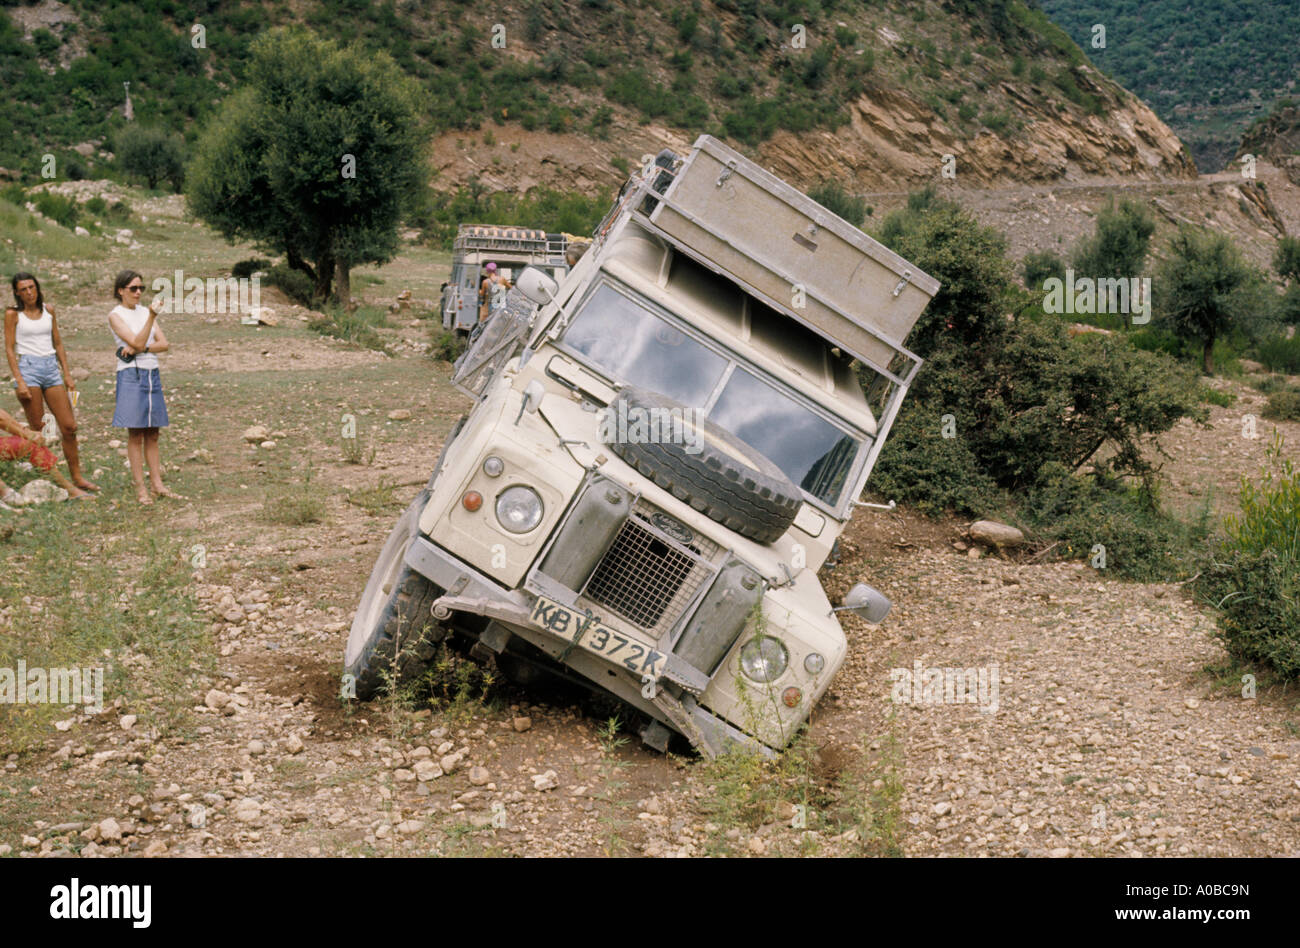 0533 06 Land Rover Series IIA one ton model in ditch Swat Valley Northwest Pakistan Asia Indian Subcontinent Stock Photo